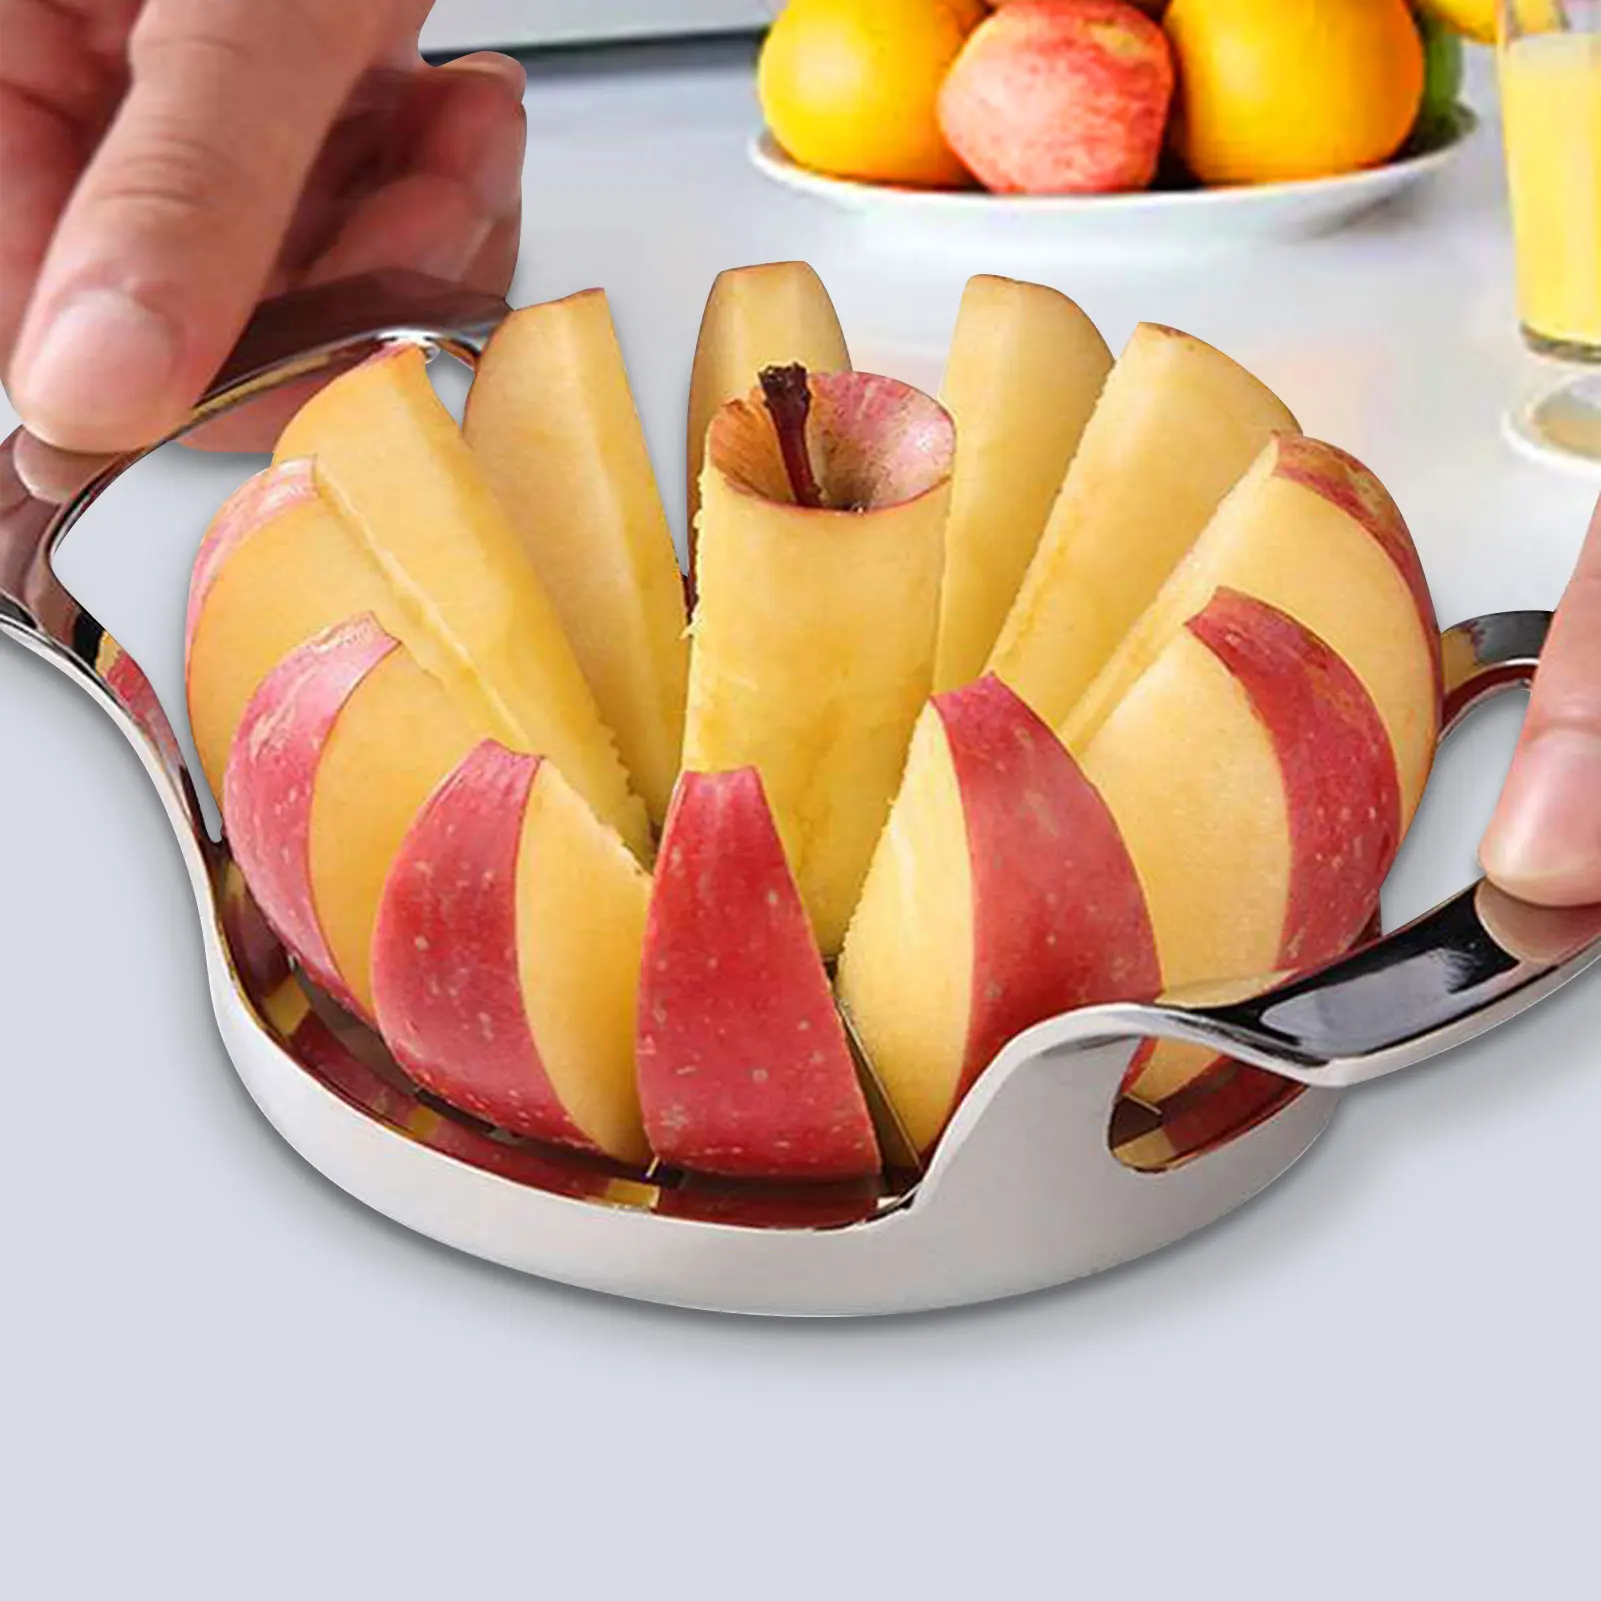 NAOFU Apple Slicer 12-blade Extra Large Apple Corer, Stainless Steel  Ultra-sharp Apple Cutter, Pitter, Divider For Up To 4 Inches Apples